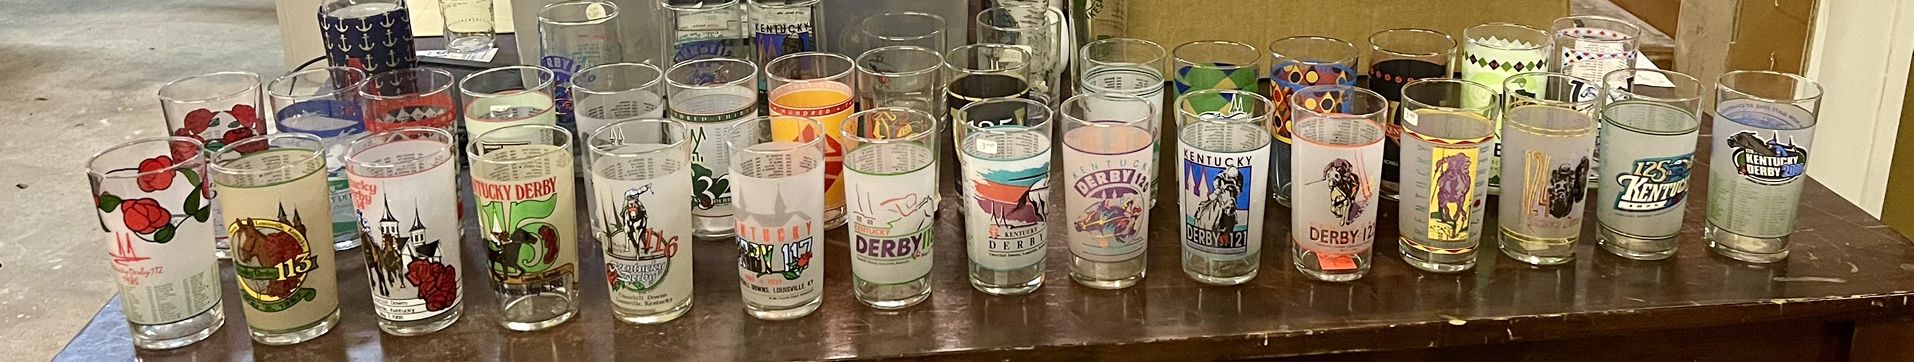 Derby Glasses For Sale